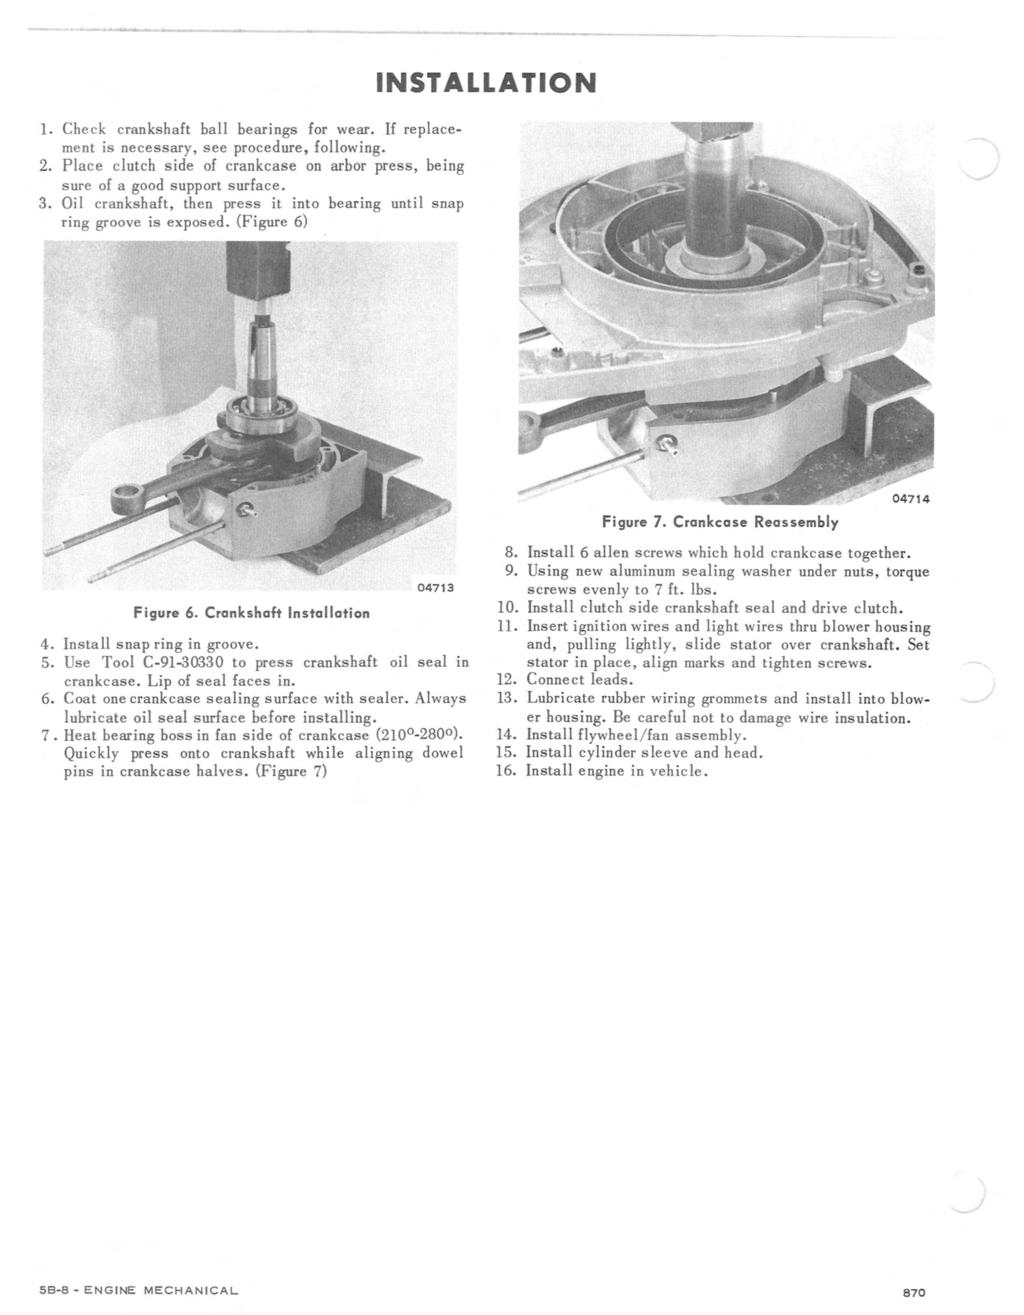 1. Check cranks ha ft ball bearings for wear. If replacement is ne cessary, see procedure, following. 2. P la ce clutch s ide of crankcas e on arbor press, being sure of a good support surface. 3.